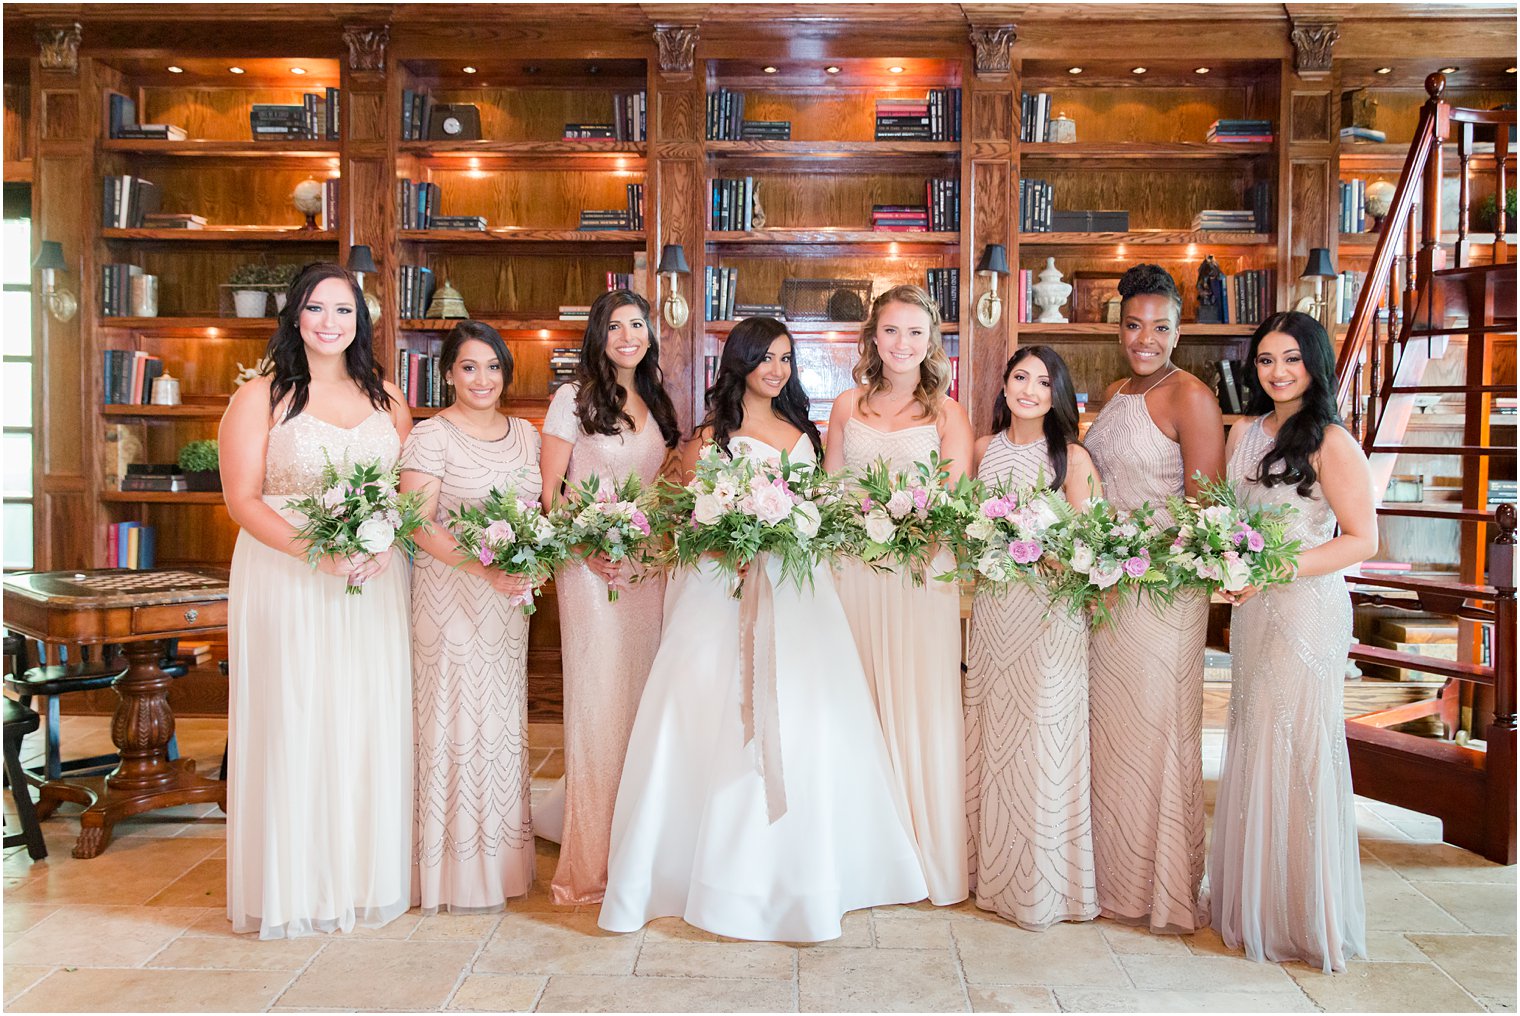 Bridesmaids in mismatched dresses with bouquets by Petal Pushers Magnolia